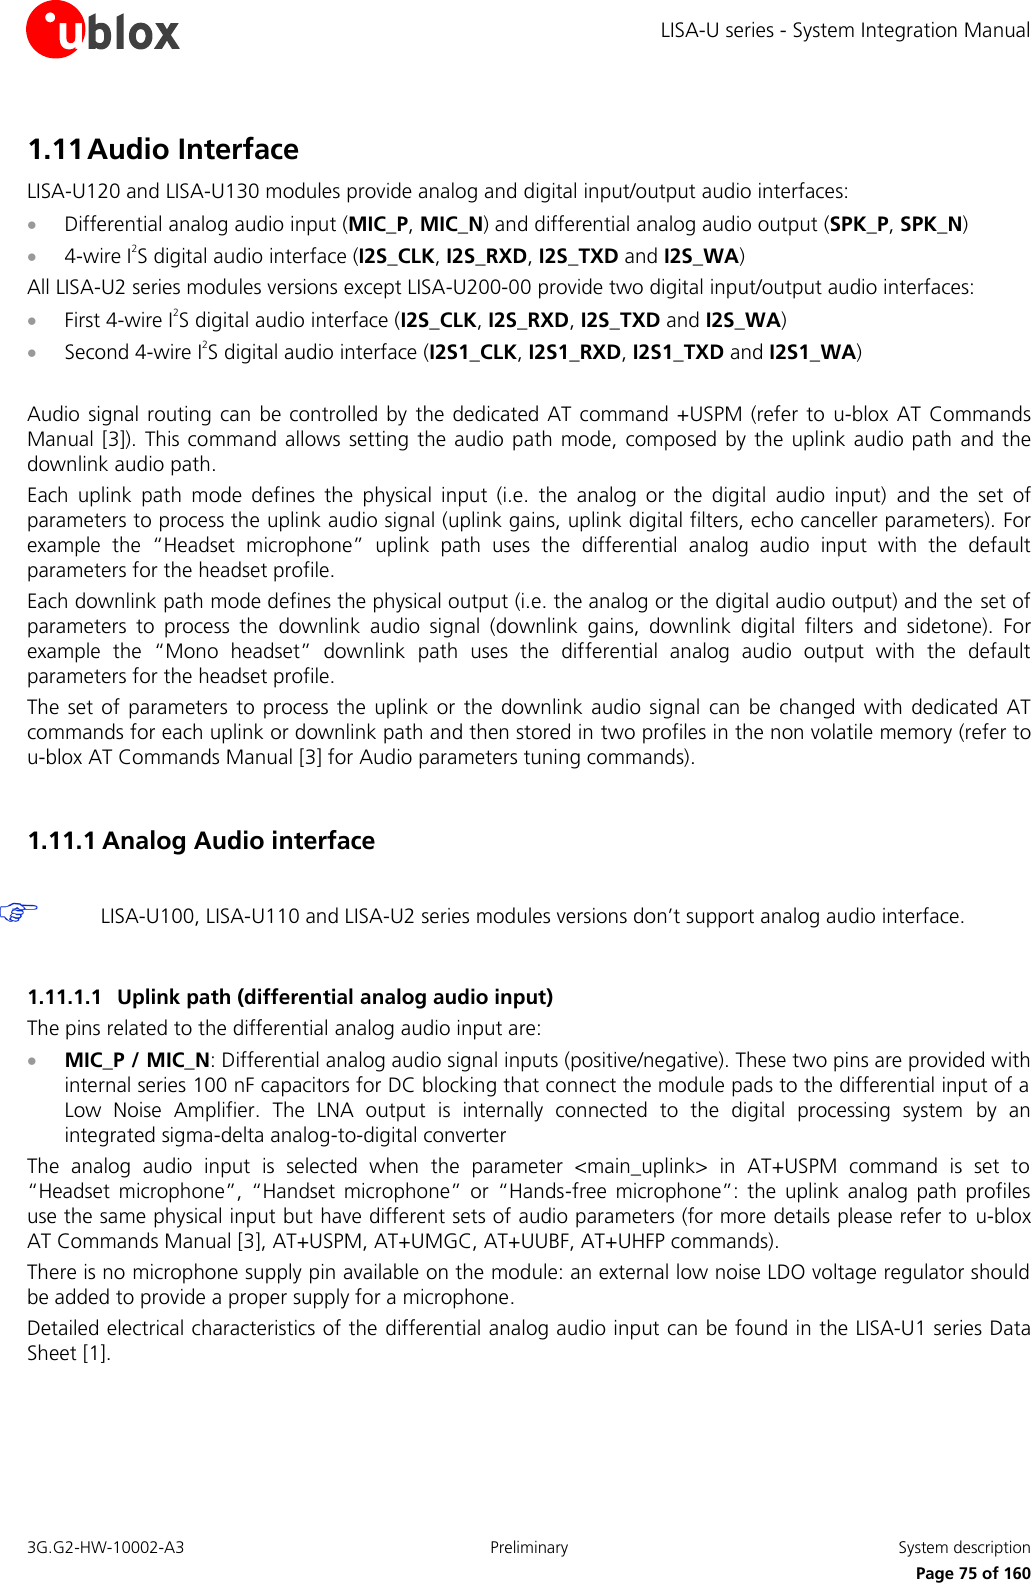 LISA-U series - System Integration Manual 3G.G2-HW-10002-A3  Preliminary  System description      Page 75 of 160 1.11 Audio Interface LISA-U120 and LISA-U130 modules provide analog and digital input/output audio interfaces:  Differential analog audio input (MIC_P, MIC_N) and differential analog audio output (SPK_P, SPK_N)  4-wire I2S digital audio interface (I2S_CLK, I2S_RXD, I2S_TXD and I2S_WA) All LISA-U2 series modules versions except LISA-U200-00 provide two digital input/output audio interfaces:  First 4-wire I2S digital audio interface (I2S_CLK, I2S_RXD, I2S_TXD and I2S_WA)  Second 4-wire I2S digital audio interface (I2S1_CLK, I2S1_RXD, I2S1_TXD and I2S1_WA)  Audio signal routing can  be controlled by  the dedicated AT command  +USPM (refer to  u-blox AT  Commands Manual [3]). This command allows setting the audio path mode, composed by the  uplink audio path  and the downlink audio path. Each  uplink  path  mode  defines  the  physical  input  (i.e.  the  analog  or  the  digital  audio  input)  and  the  set  of parameters to process the uplink audio signal (uplink gains, uplink digital filters, echo canceller parameters). For example  the  “Headset  microphone”  uplink  path  uses  the  differential  analog  audio  input  with  the  default parameters for the headset profile. Each downlink path mode defines the physical output (i.e. the analog or the digital audio output) and the set of parameters  to  process  the  downlink  audio  signal  (downlink  gains,  downlink  digital  filters  and  sidetone).  For example  the  “Mono  headset”  downlink  path  uses  the  differential  analog  audio  output  with  the  default parameters for the headset profile. The  set of parameters  to process  the  uplink or  the downlink audio  signal  can  be changed  with dedicated AT commands for each uplink or downlink path and then stored in two profiles in the non volatile memory (refer to u-blox AT Commands Manual [3] for Audio parameters tuning commands).  1.11.1 Analog Audio interface   LISA-U100, LISA-U110 and LISA-U2 series modules versions don’t support analog audio interface.  1.11.1.1 Uplink path (differential analog audio input) The pins related to the differential analog audio input are:  MIC_P / MIC_N: Differential analog audio signal inputs (positive/negative). These two pins are provided with internal series 100 nF capacitors for DC blocking that connect the module pads to the differential input of a Low  Noise  Amplifier.  The  LNA  output  is  internally  connected  to  the  digital  processing  system  by  an integrated sigma-delta analog-to-digital converter The  analog  audio  input  is  selected  when  the  parameter  &lt;main_uplink&gt;  in  AT+USPM  command  is  set  to “Headset  microphone”,  “Handset  microphone”  or  “Hands-free  microphone”:  the  uplink analog  path  profiles use the same physical input but have different sets of audio parameters (for more details please refer to u-blox AT Commands Manual [3], AT+USPM, AT+UMGC, AT+UUBF, AT+UHFP commands). There is no microphone supply pin available on the module: an external low noise LDO voltage regulator should be added to provide a proper supply for a microphone. Detailed electrical characteristics of the differential analog audio input can be found in the LISA-U1 series Data Sheet [1].  